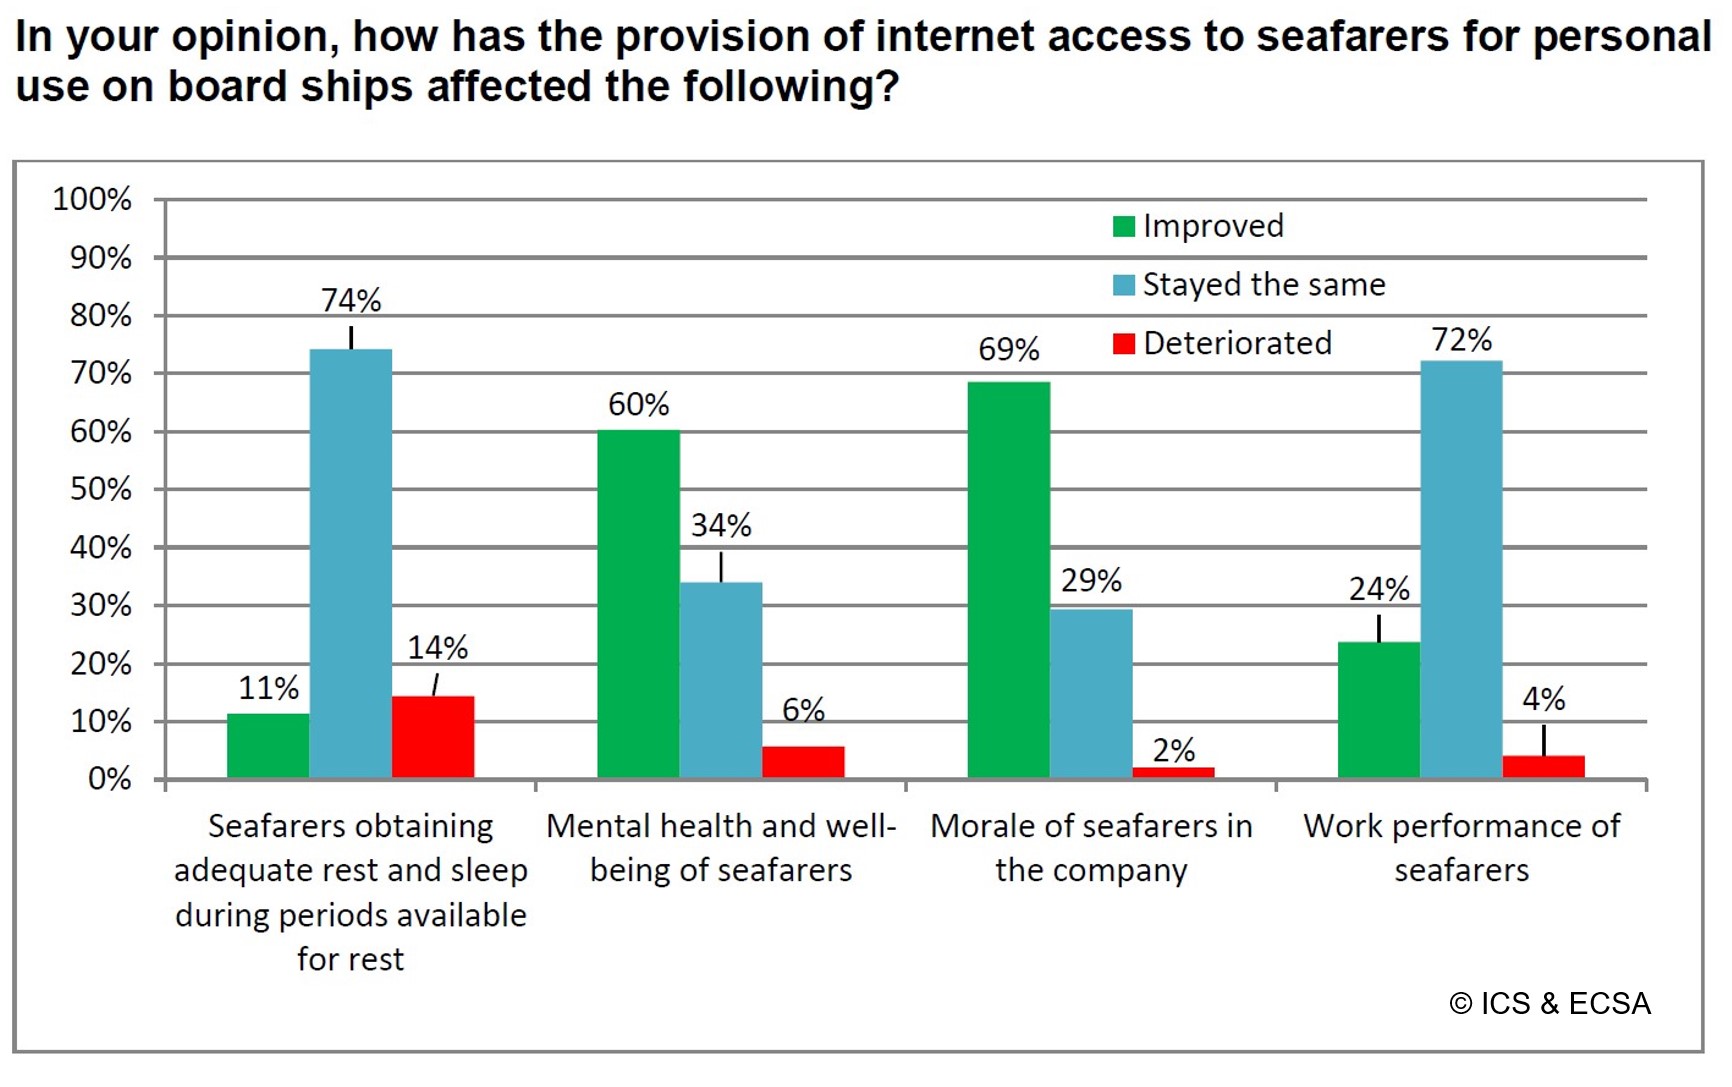 Internet access onboard has increased seafarers' morale and mental wellbeing